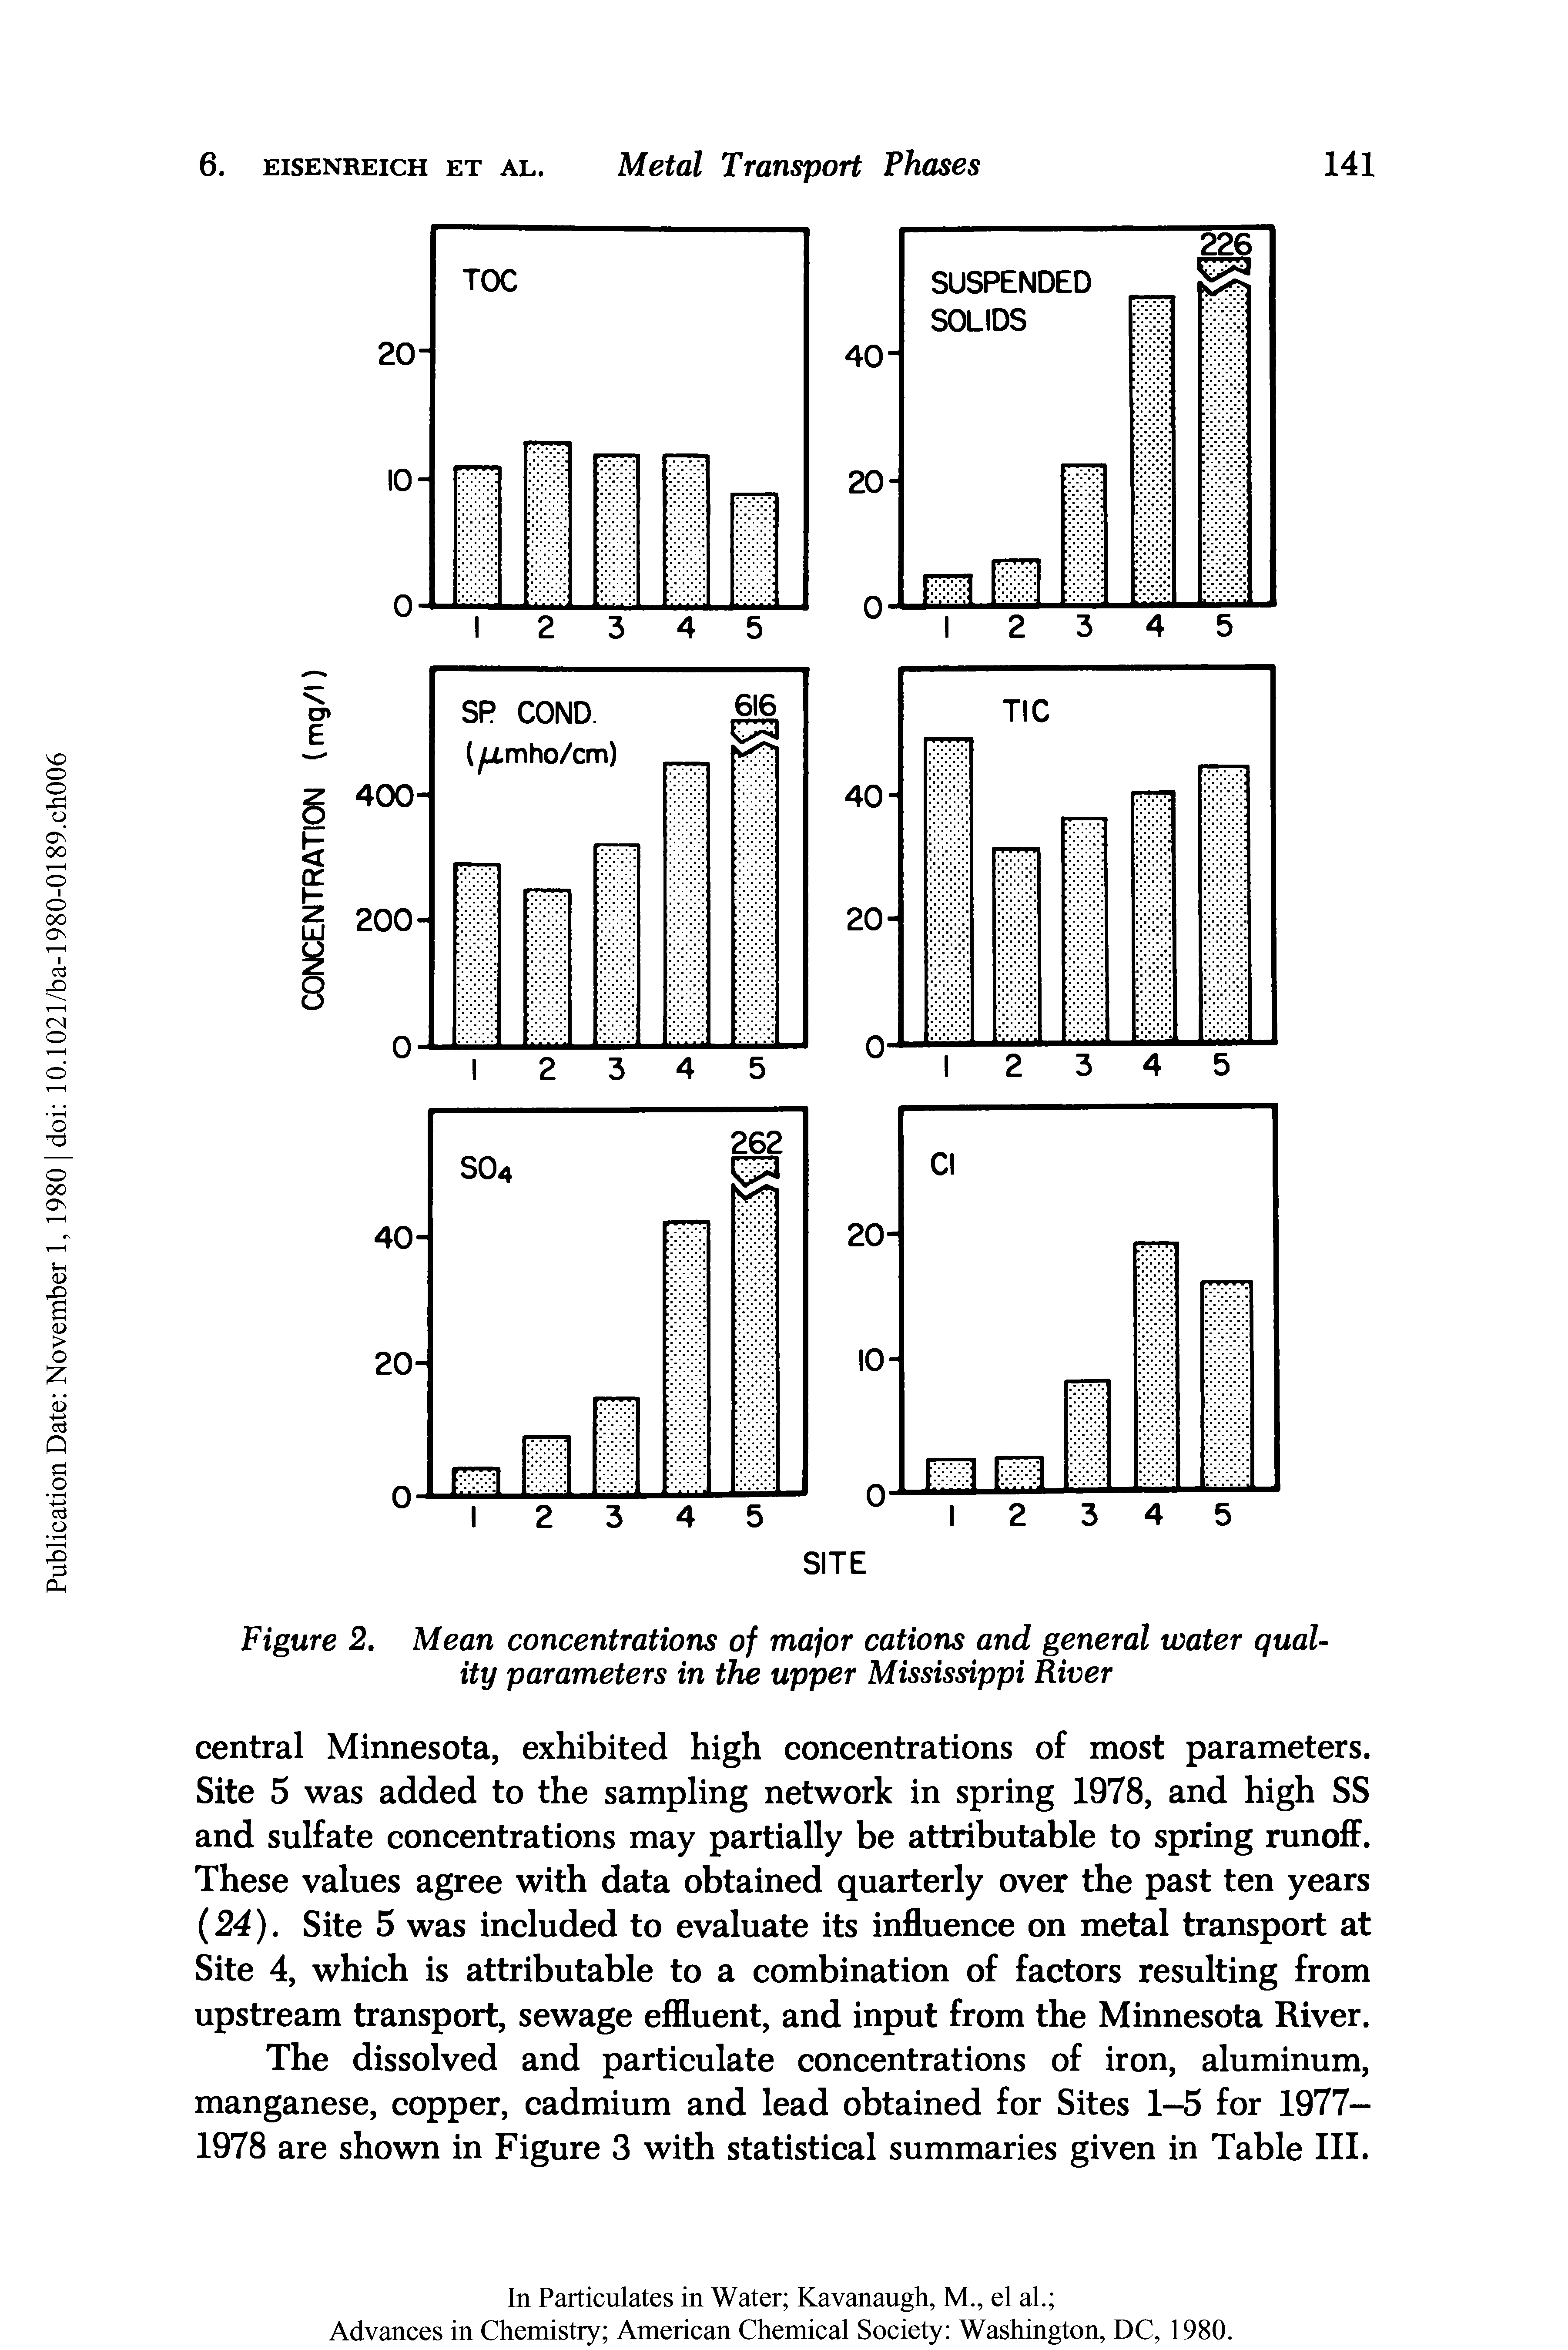 Figure 2, Mean concentrations of major cations and general water quality parameters in the upper Mississippi River...